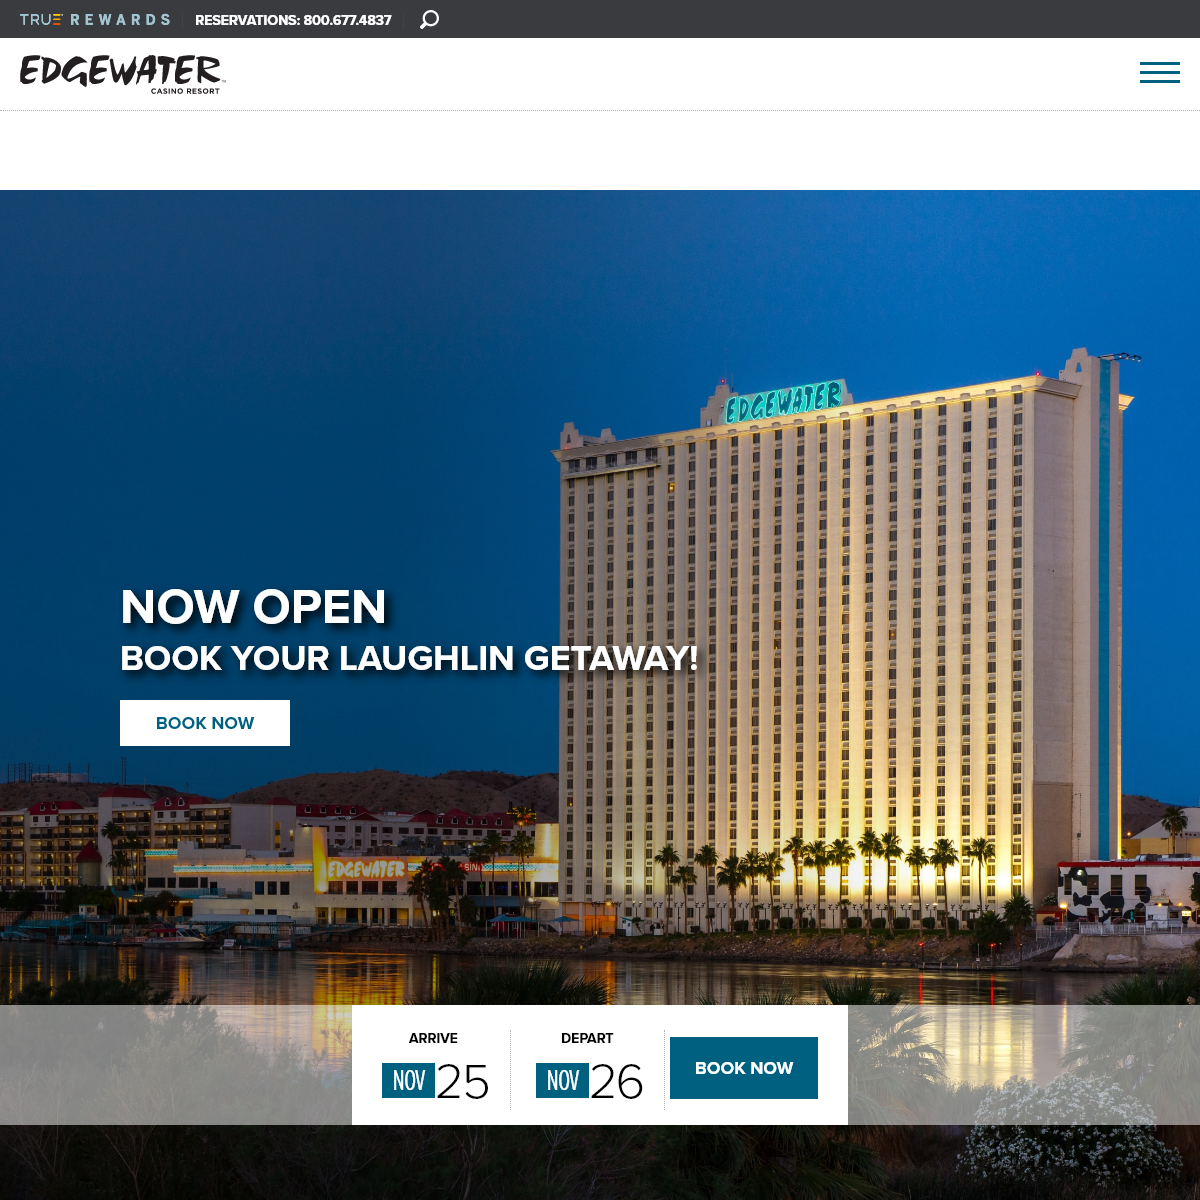 A complete backup of edgewater-casino.com